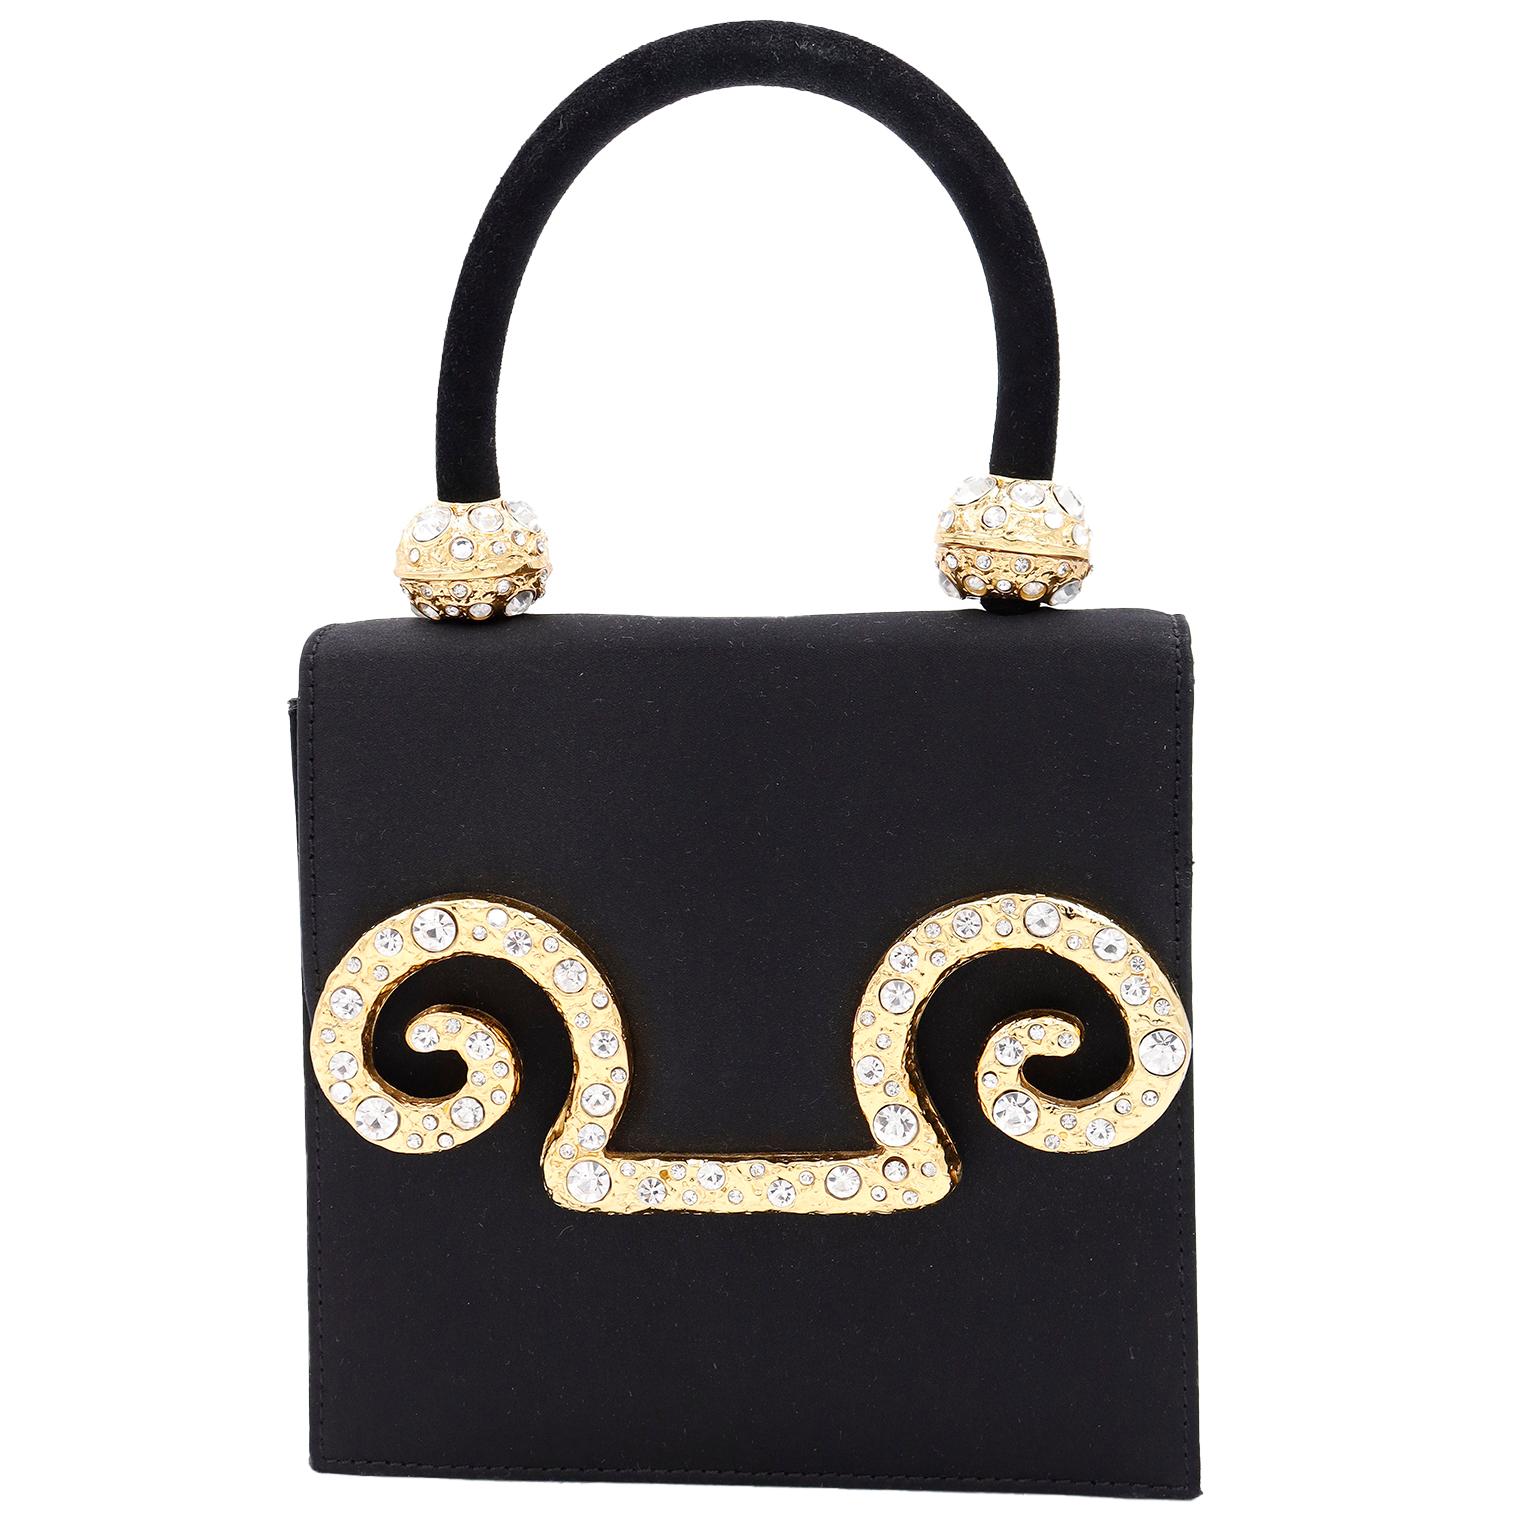 Edouard Rambaud jewelry and accessories are some of the most unique pieces we have come across and this bag is no exception! This fabulous 1980's Rambaud evening bag is in a luxe black satin, which contrasts nicely with the gold plated hardware and